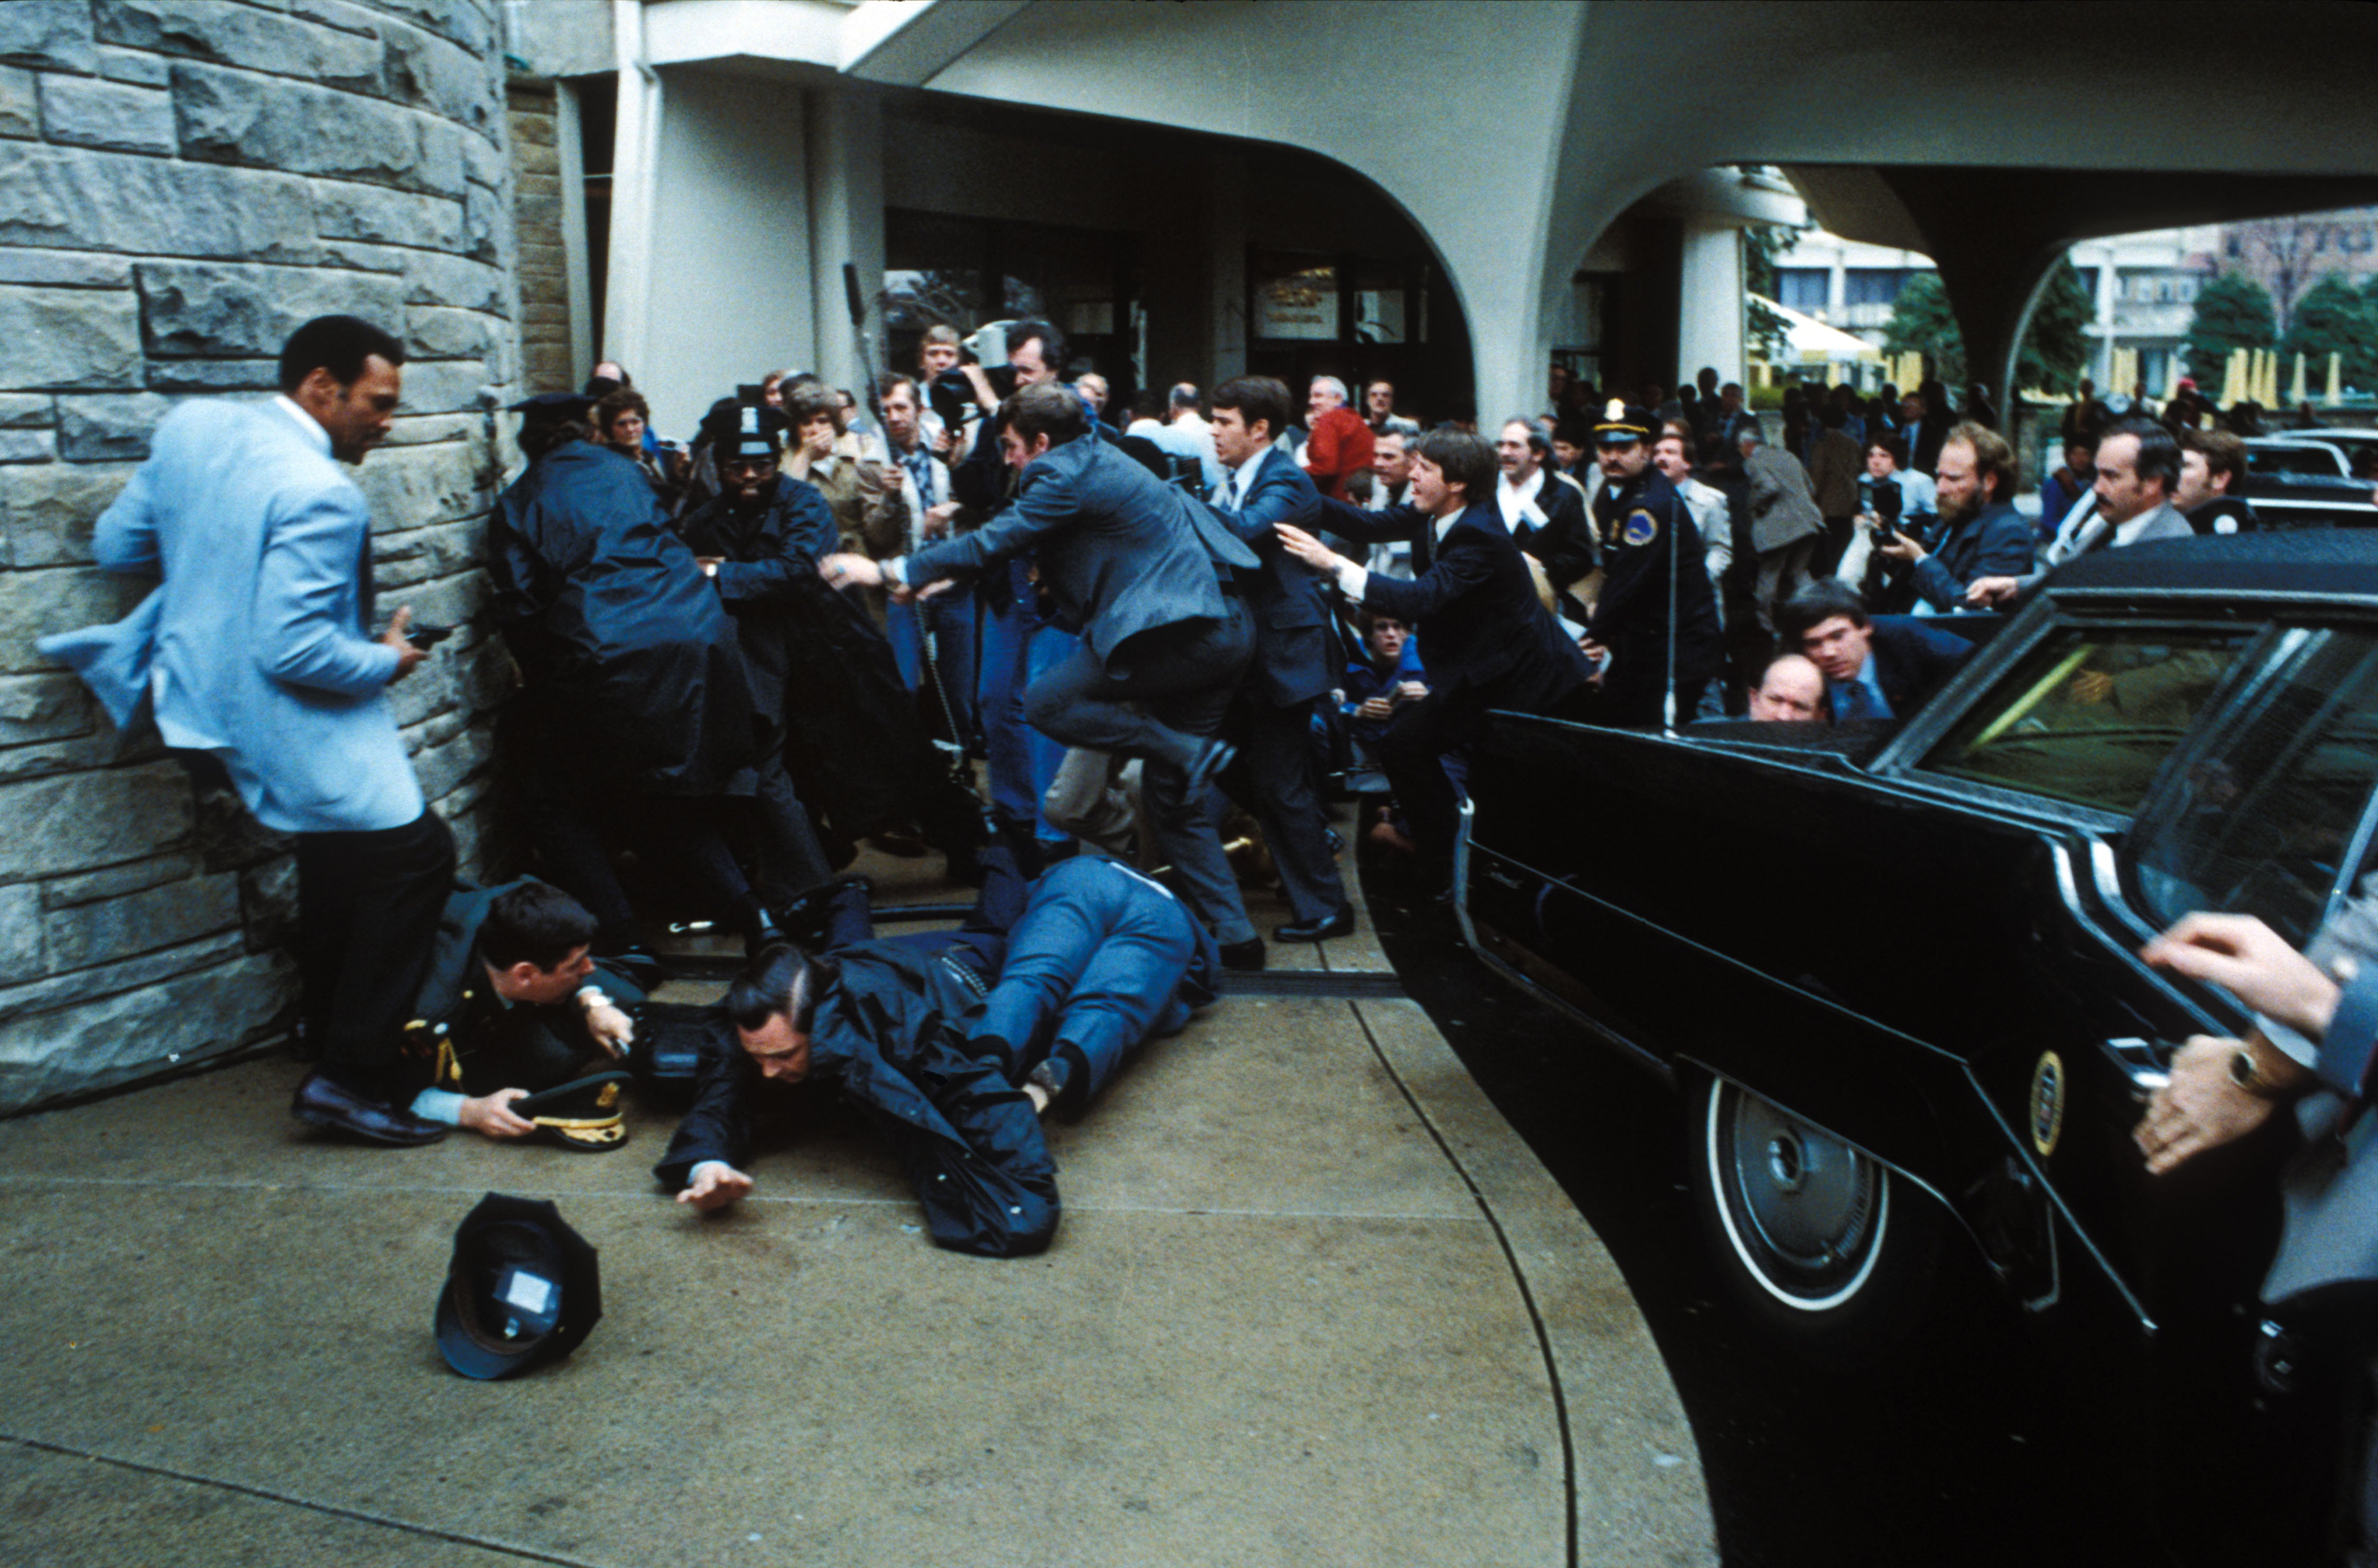 John Hinckley Jr is tackled to the ground by Secret Service agents after attempting to assassinate Ronald Reagan